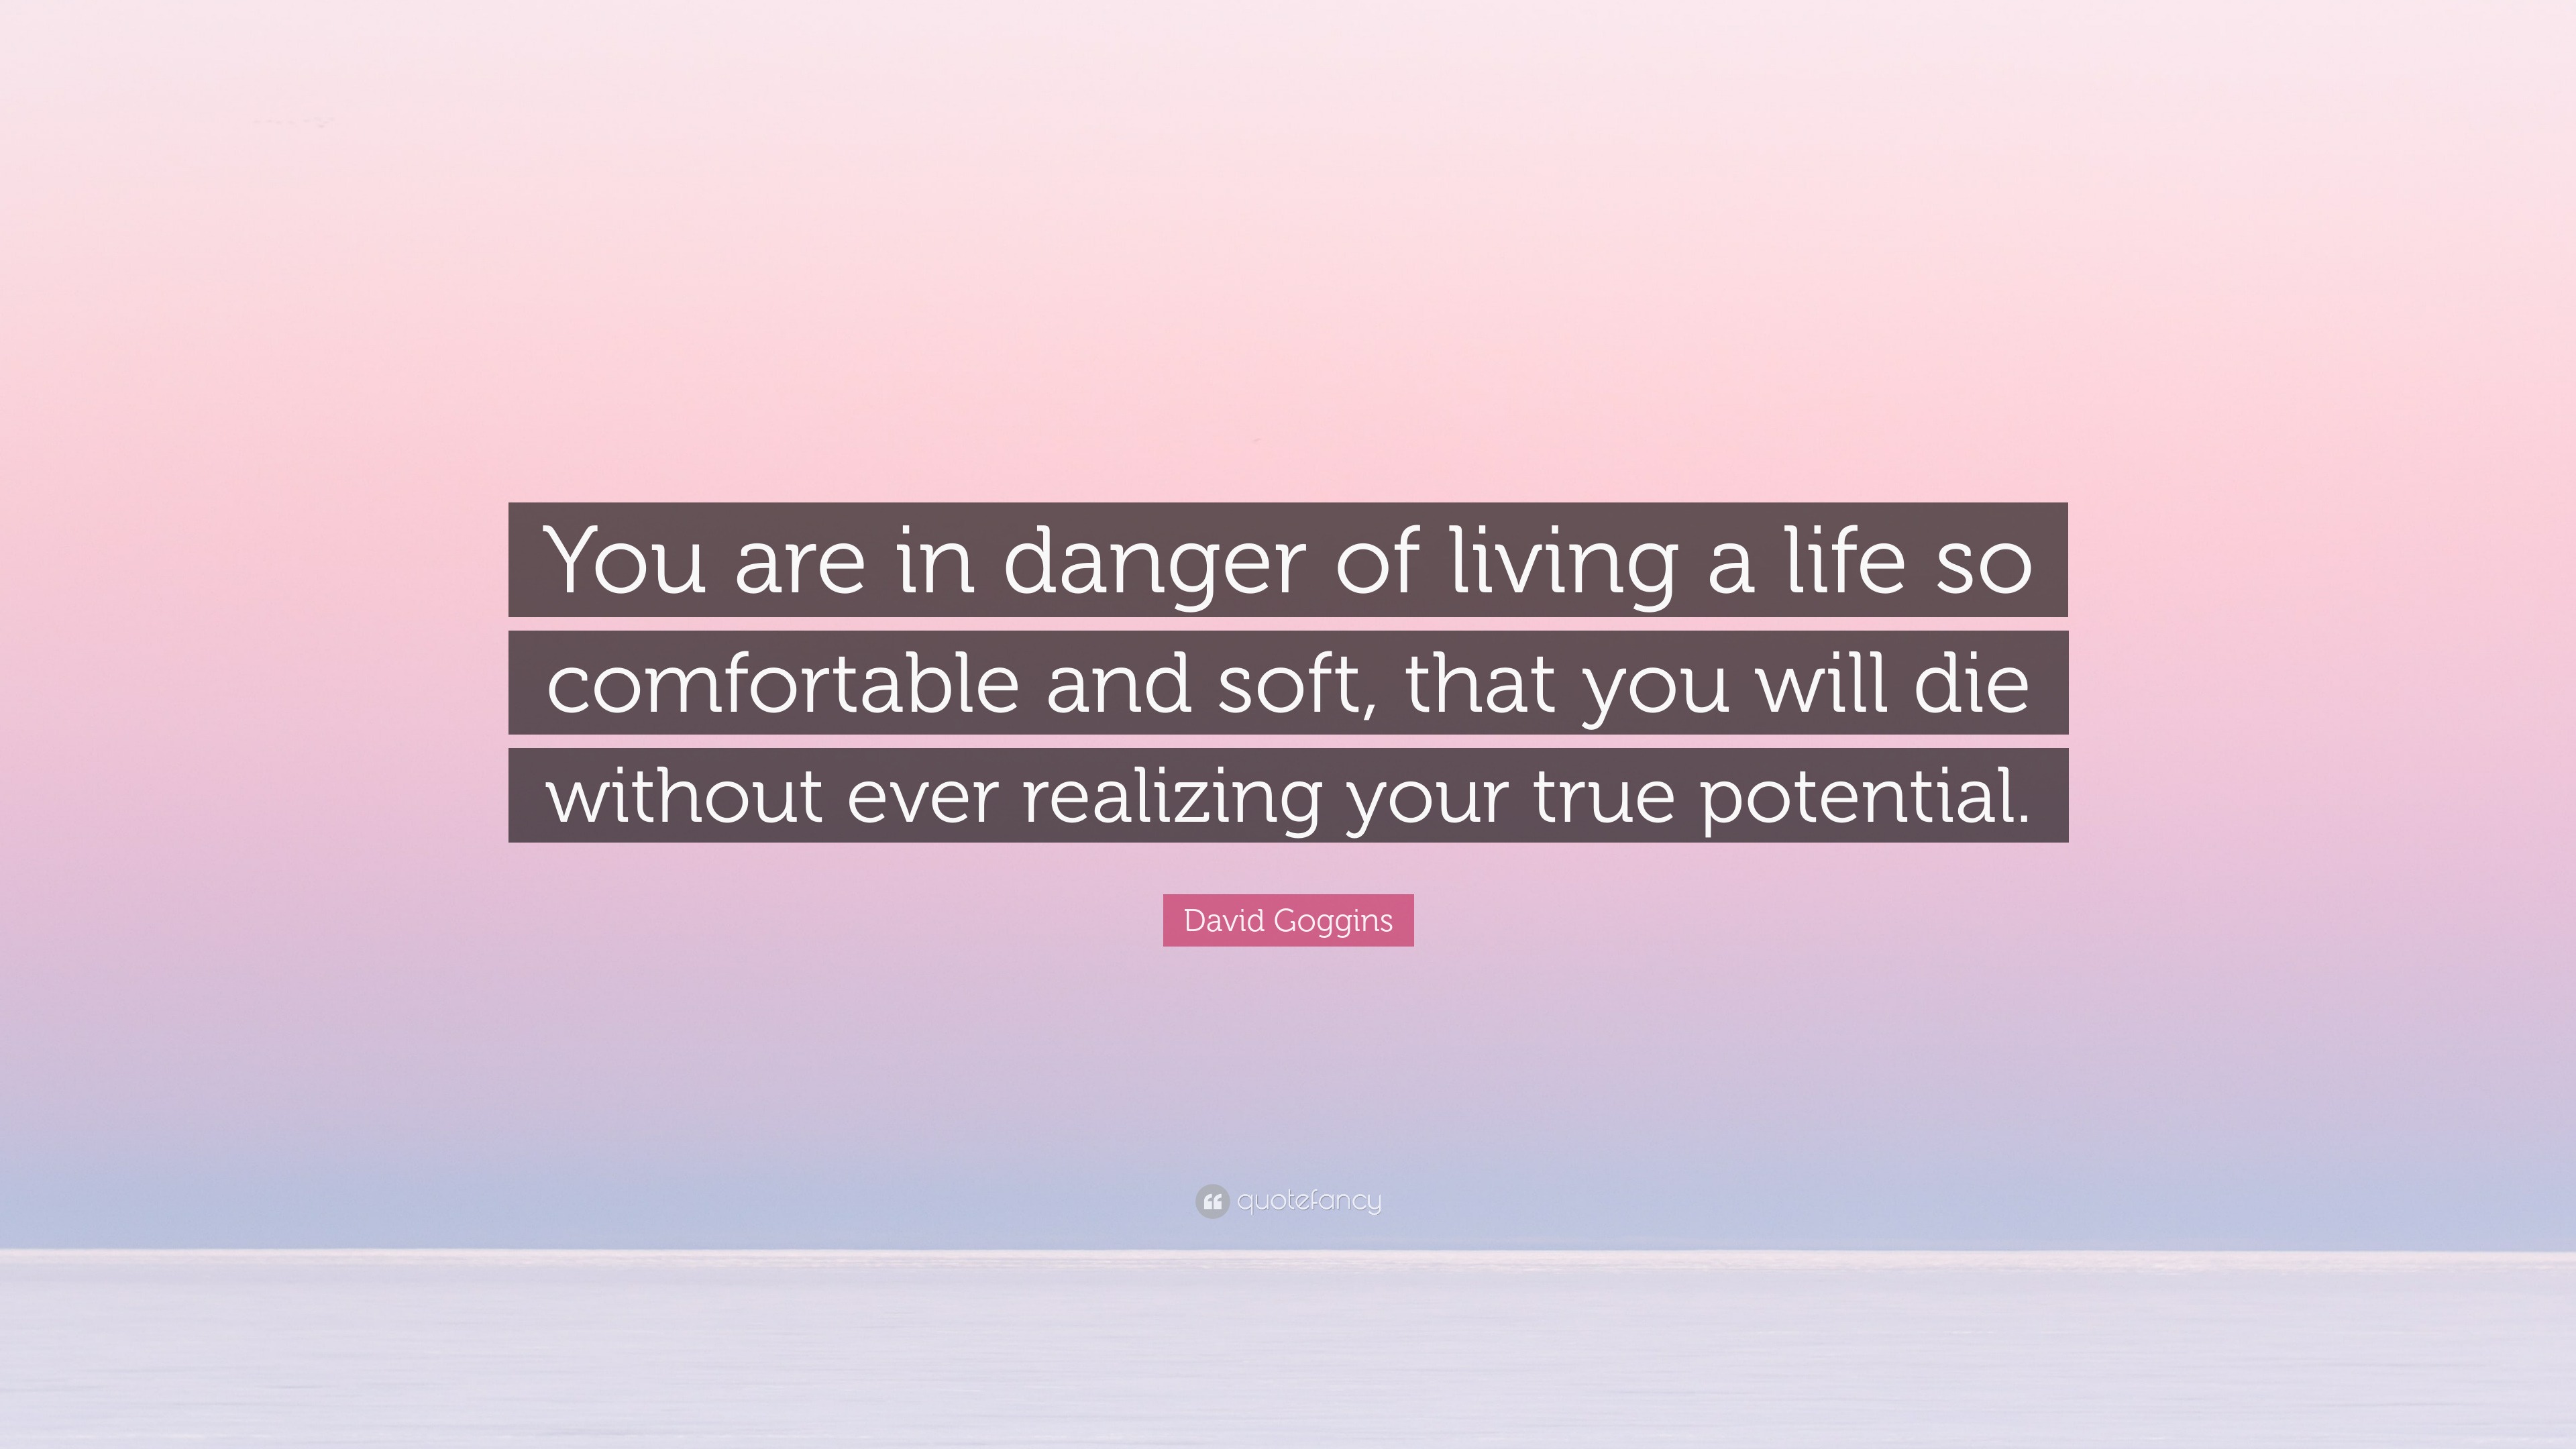 David Goggins Quote You are in danger of living a life so comfortable and  soft that you will die without ever realizing your true potential